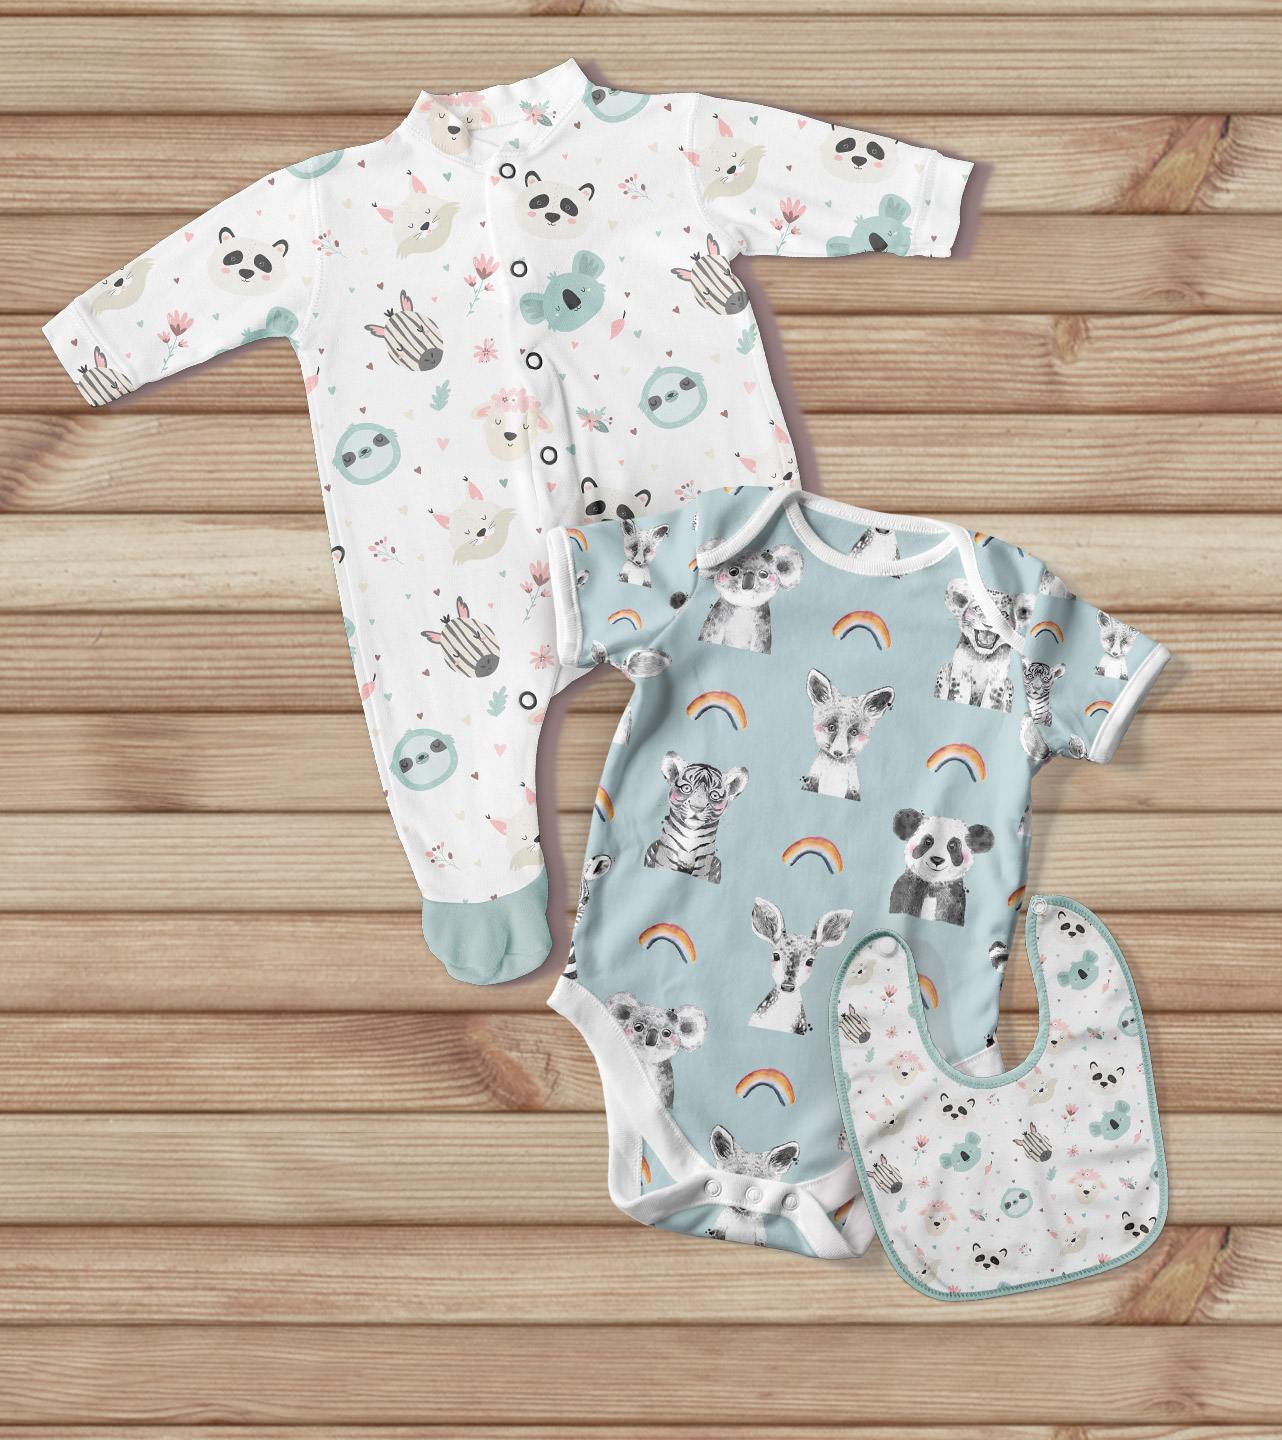 Baby clothes with animal print